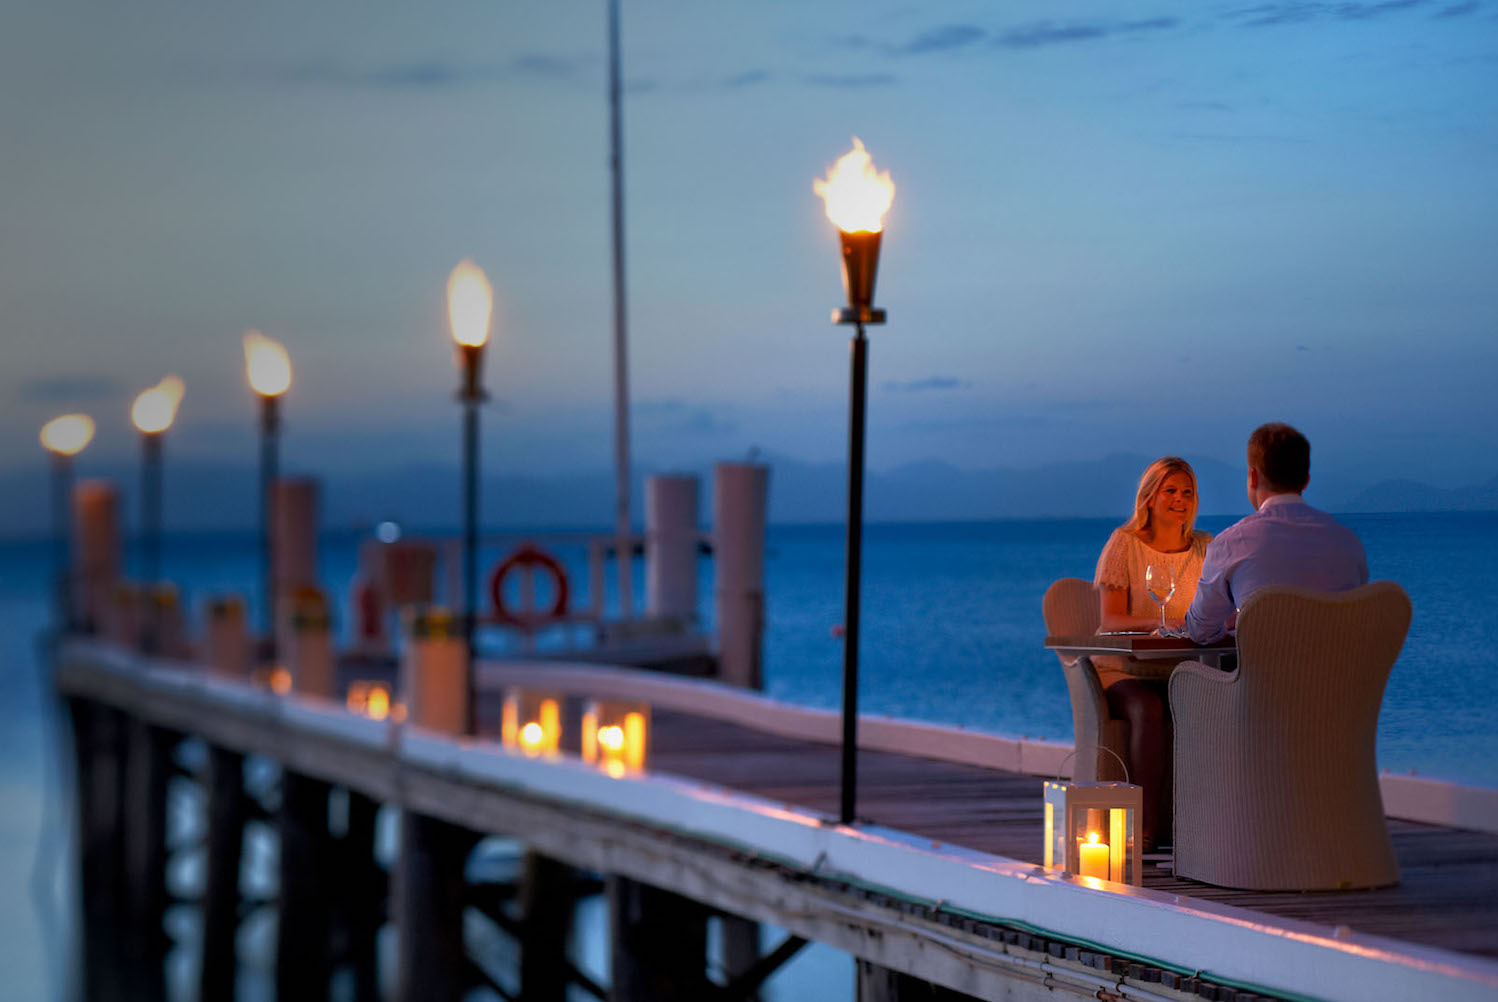 One of the unique and exclusive Australian experiences is Dining with the tides at Orpheus Island